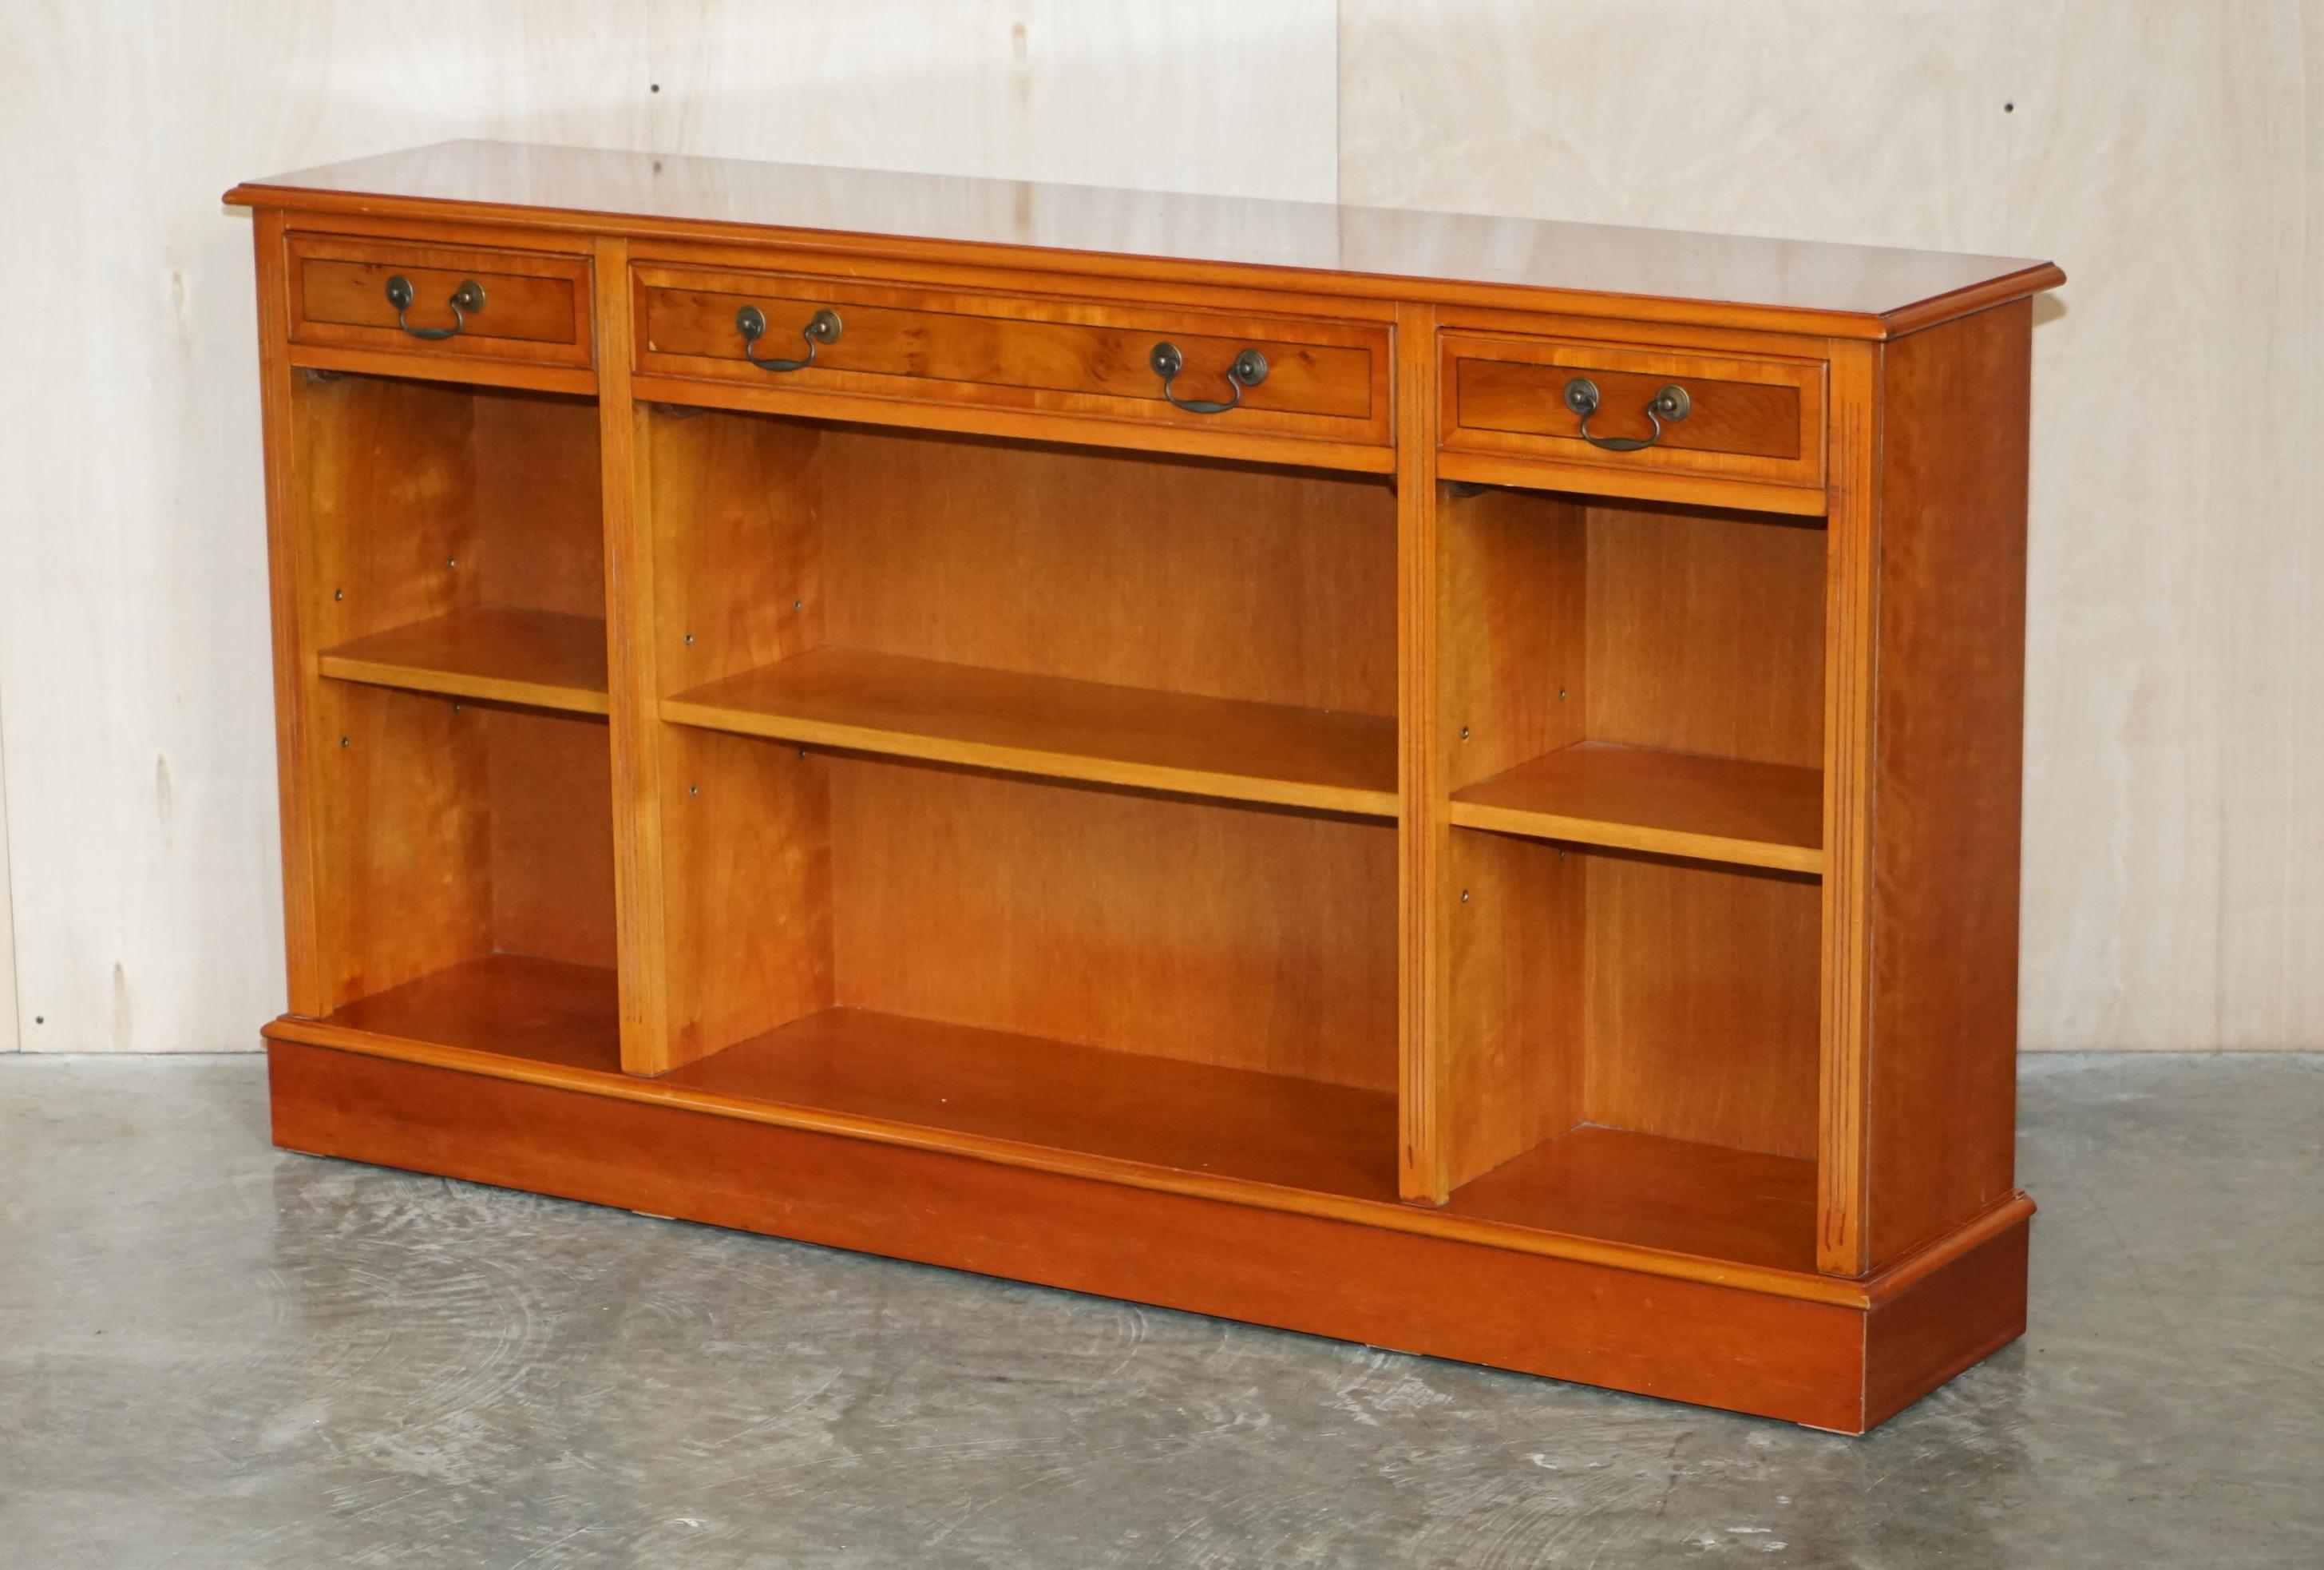 We are delighted to offer for sale this lovely vintage Burr Yew wood open library bookcase / sideboard with drawers. 

A good looking and utilitarian piece of furniture, it looks good in any setting, the shelves are all height adjustable to fit